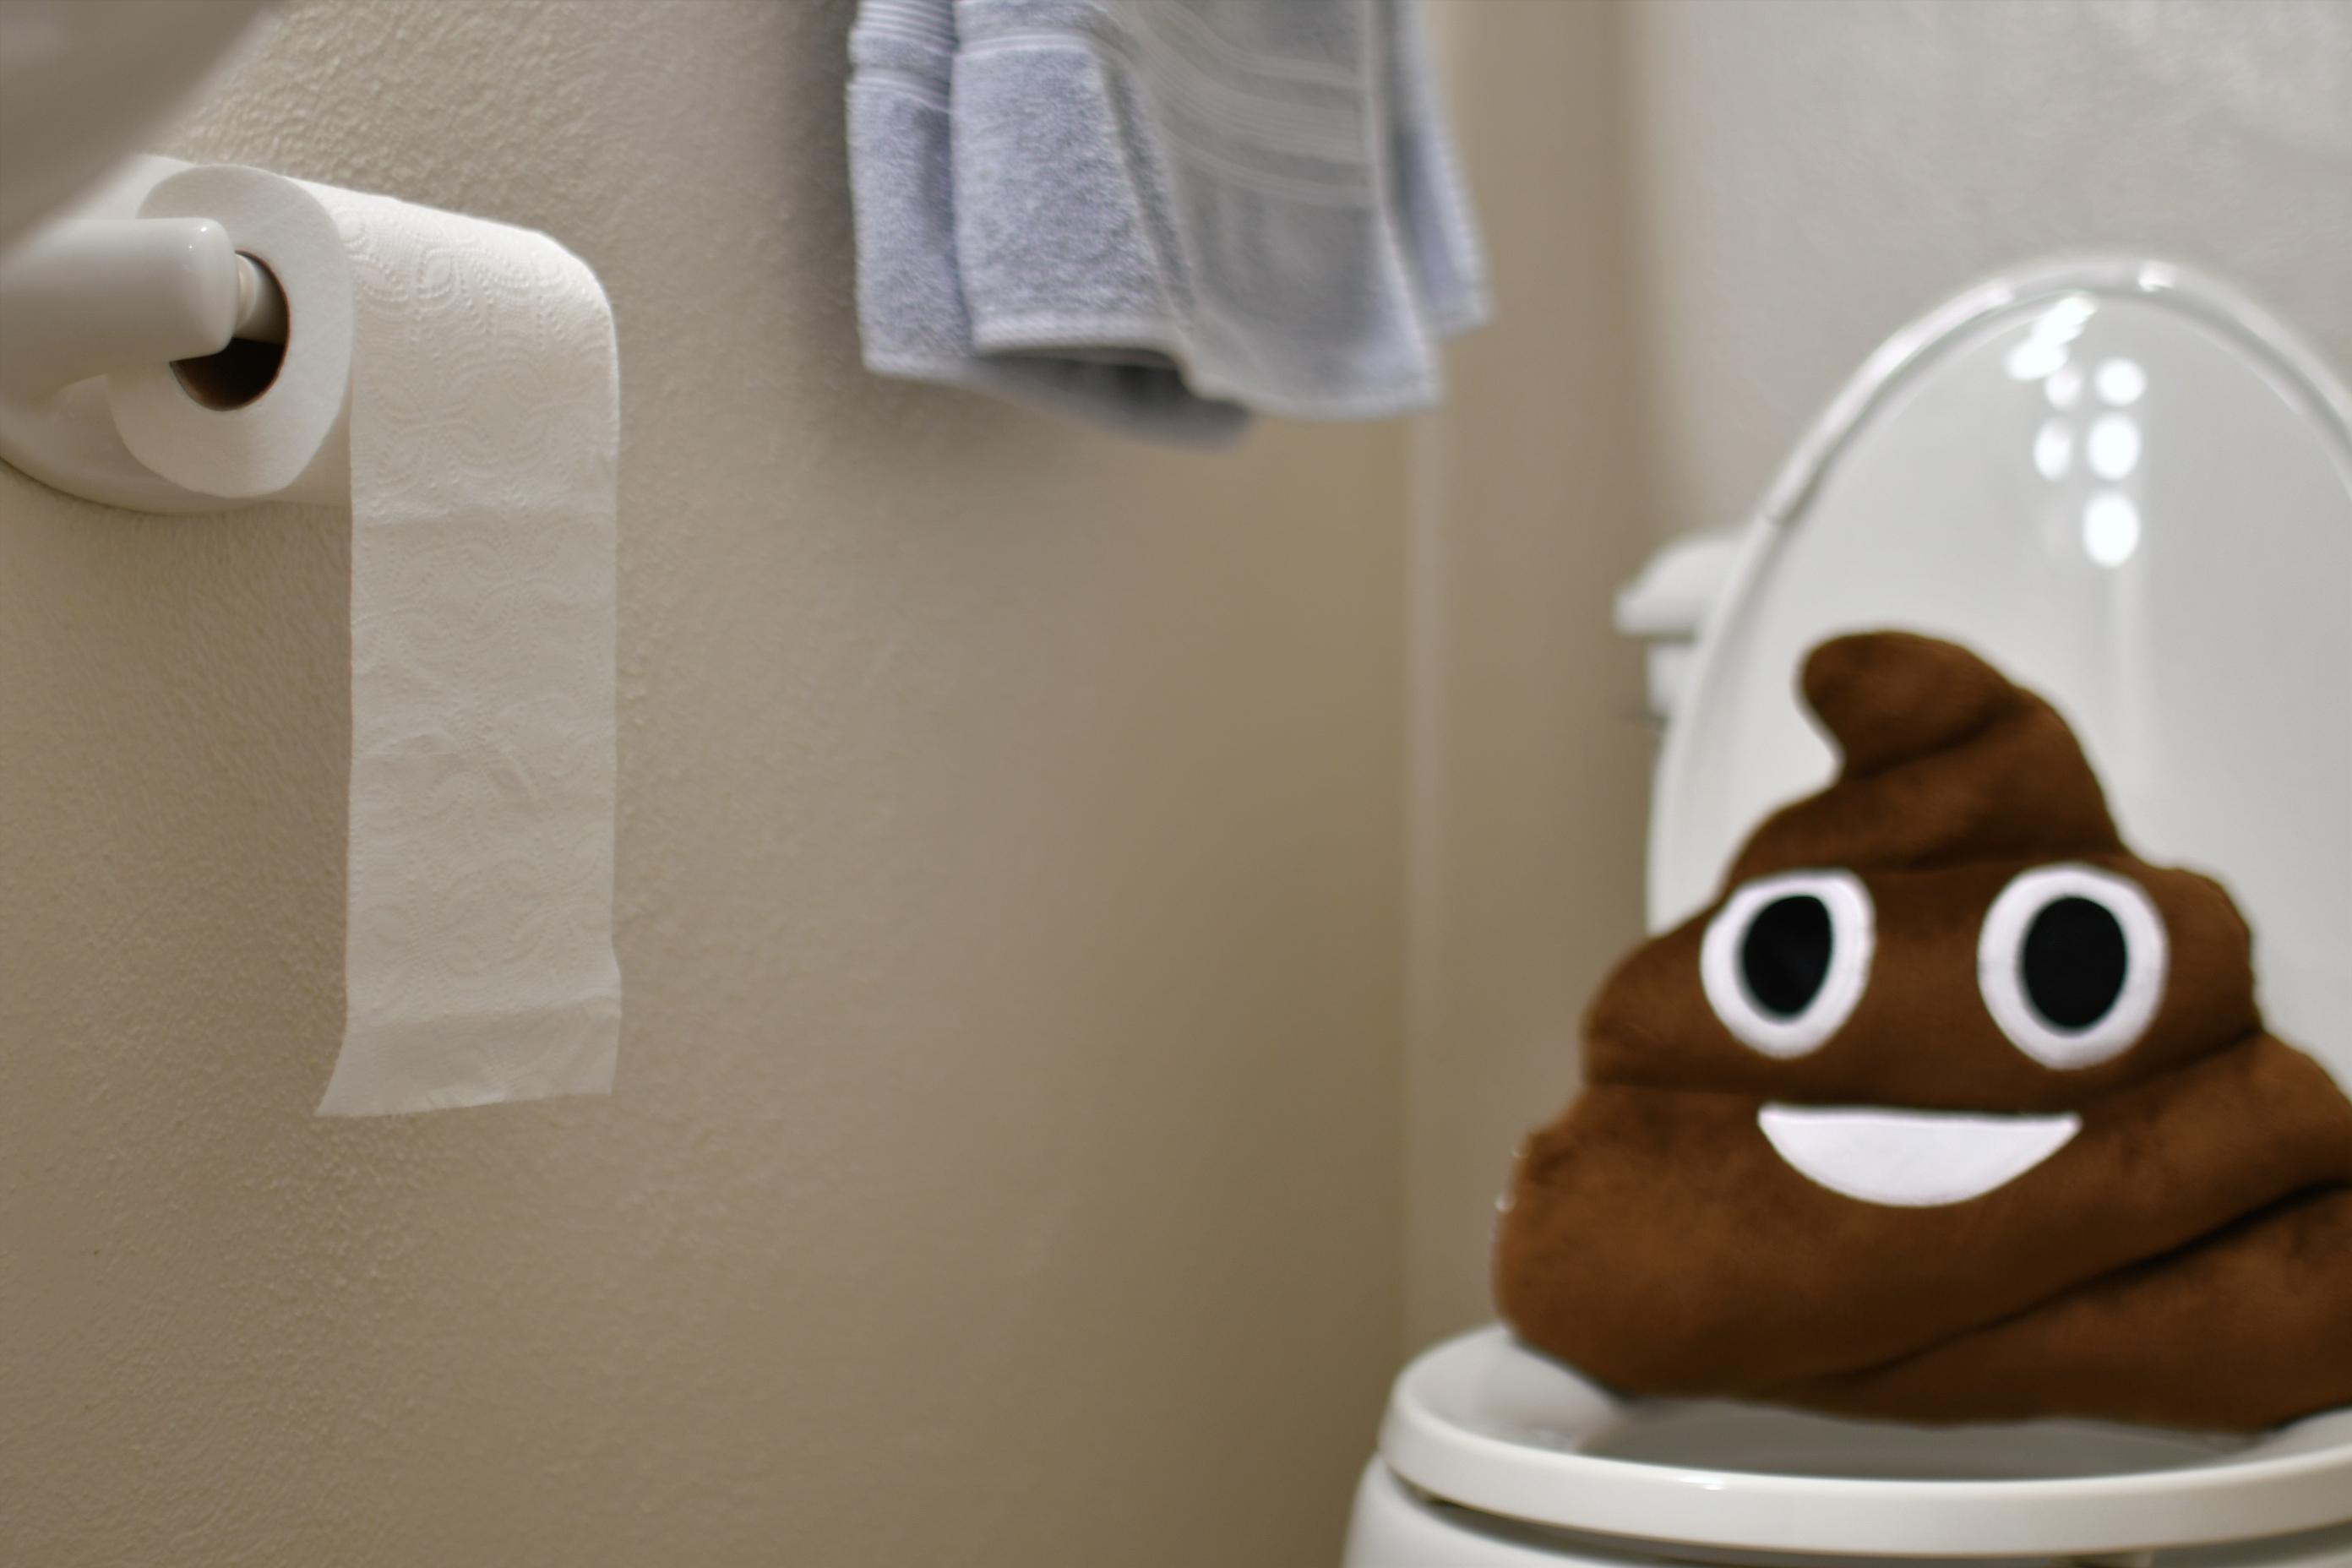 4 Ways to Unclog a Toilet That Won't Drain